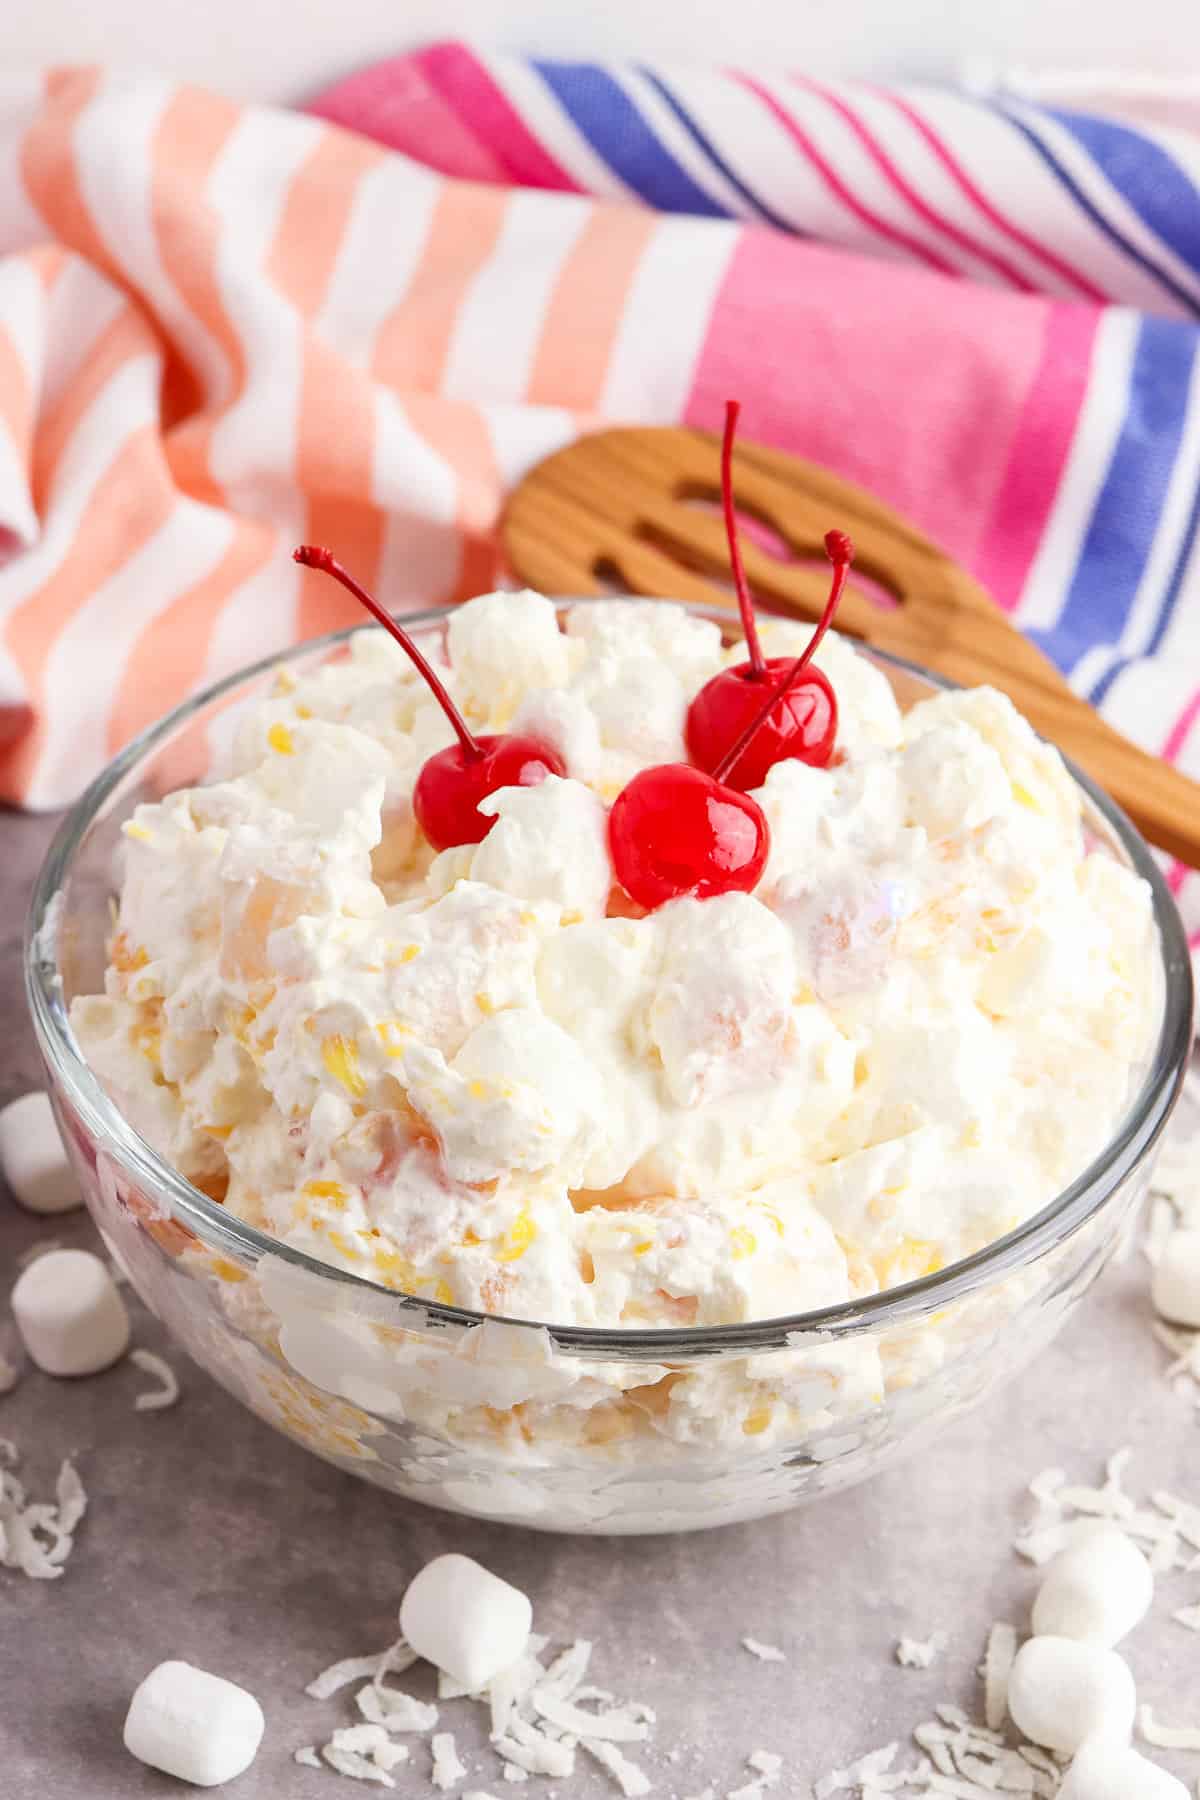 Marshmallow fruit salad with cool whip and canned fruit in a large glass bowl with colorful linen and slotted wooden spoon.